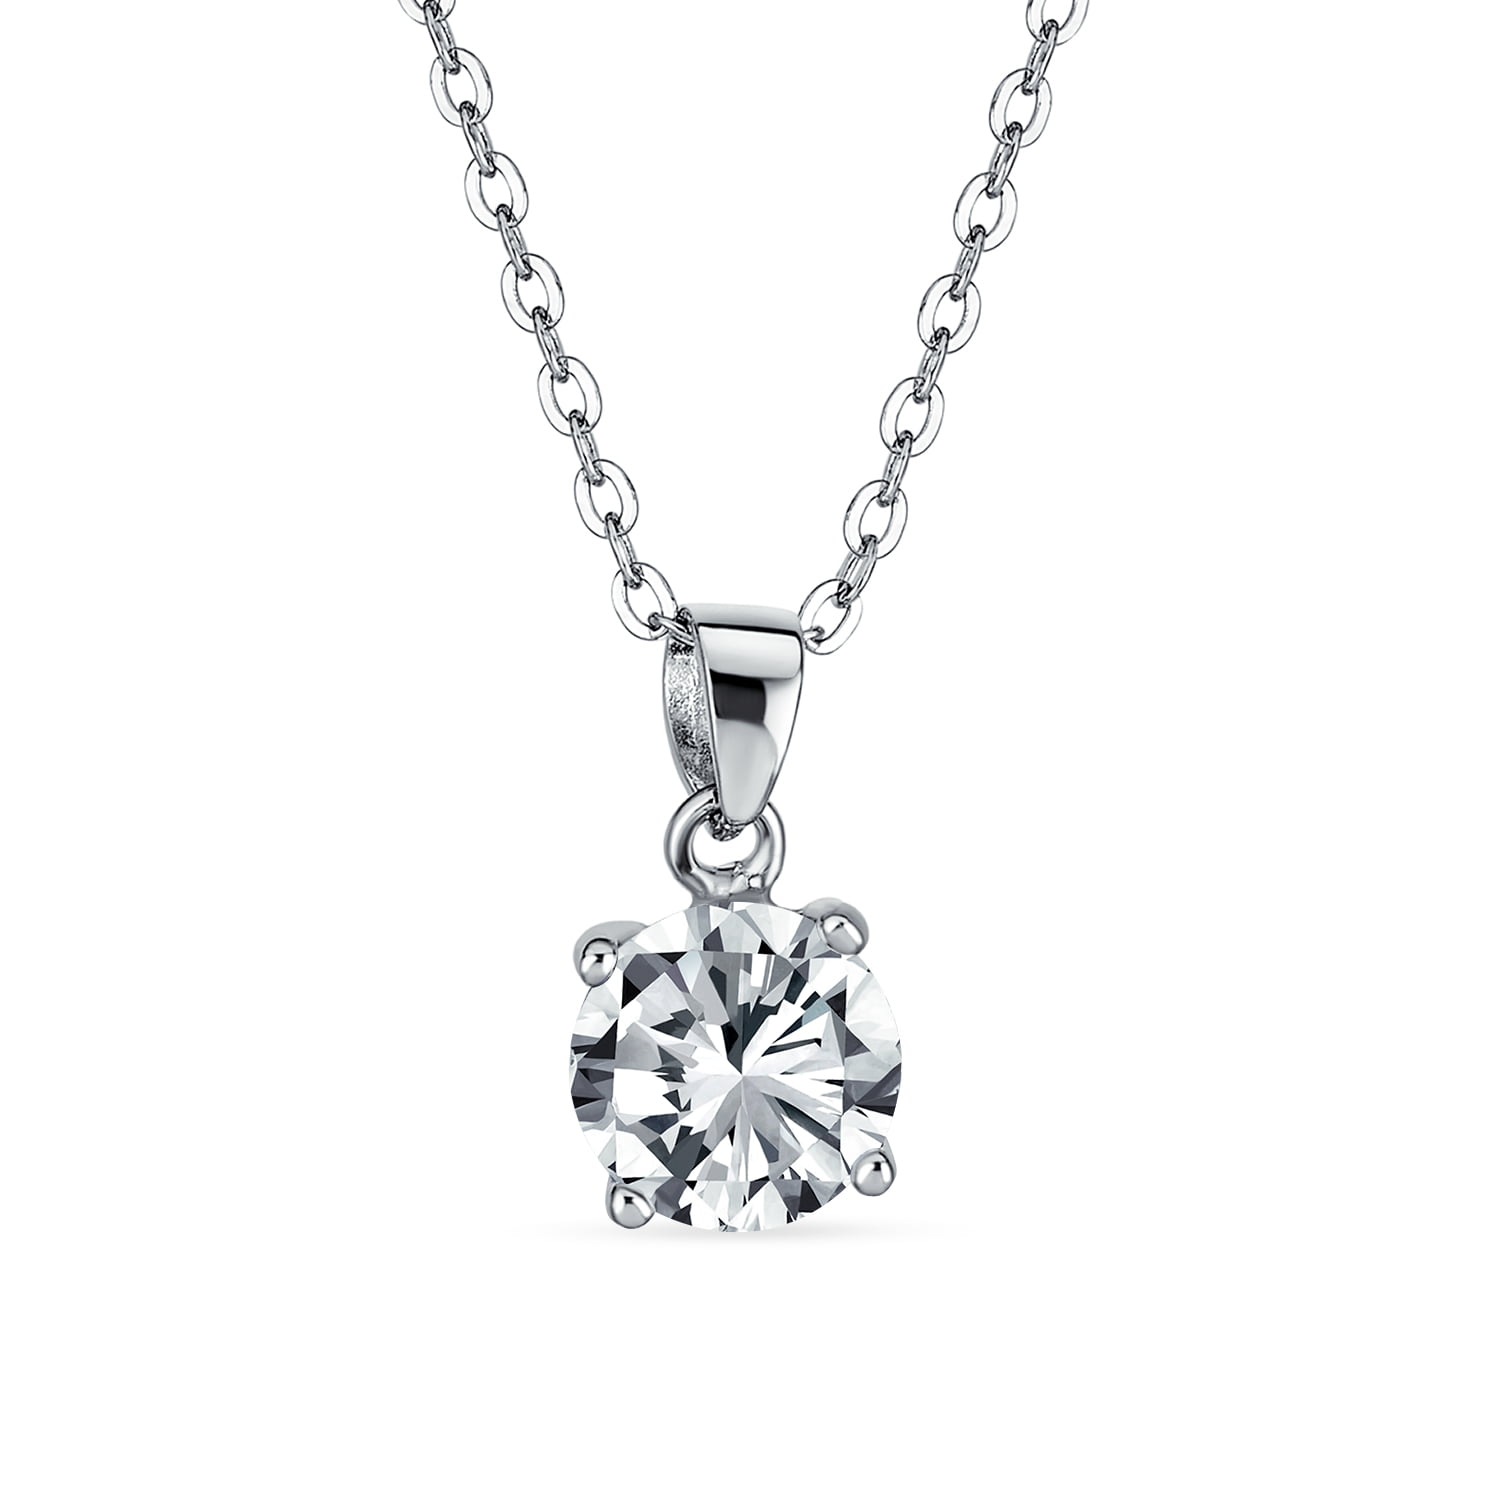 Happy Birthday Solitaire Sterling Silver 12 Months Necklace Cubic Zircon Pendant Mothers Day Gifts